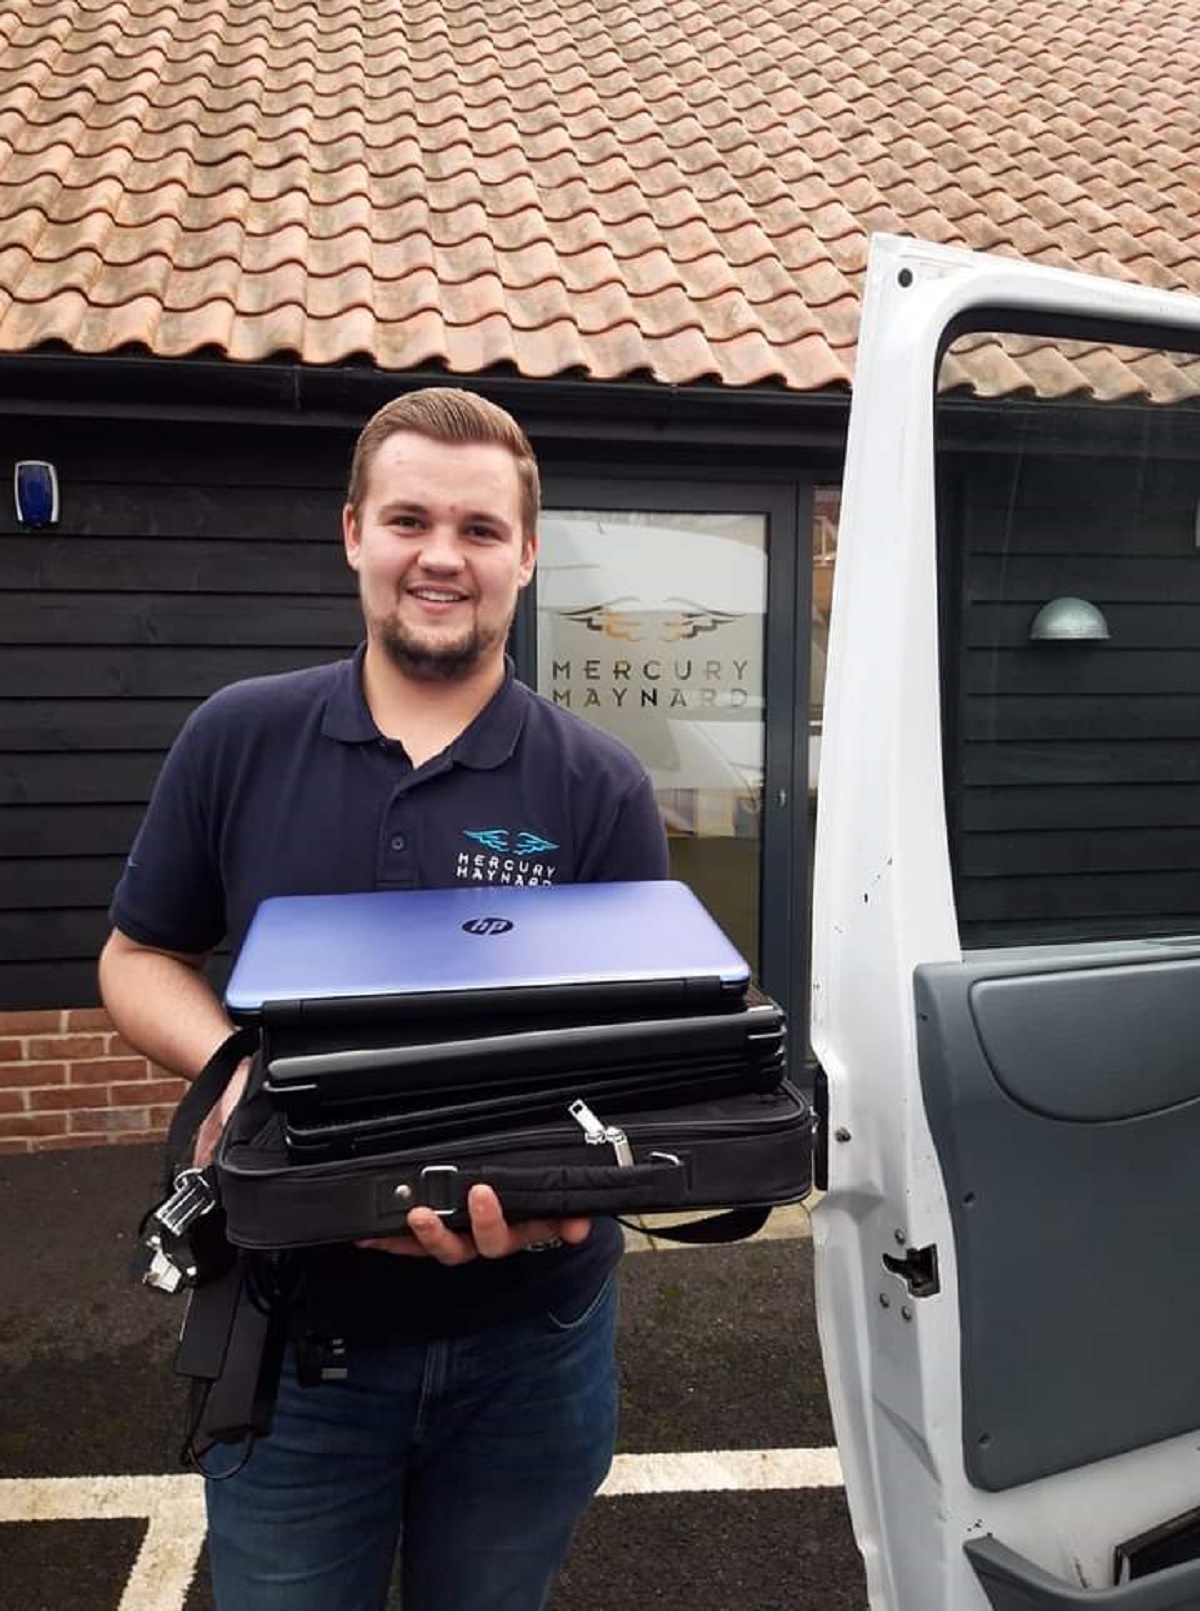 Online support - XXX, from Ardleigh-based Mercury Maynard. The Anti-Loo Roll Brigade joined forces with the company to help provide more than 100 laptops for home schooling